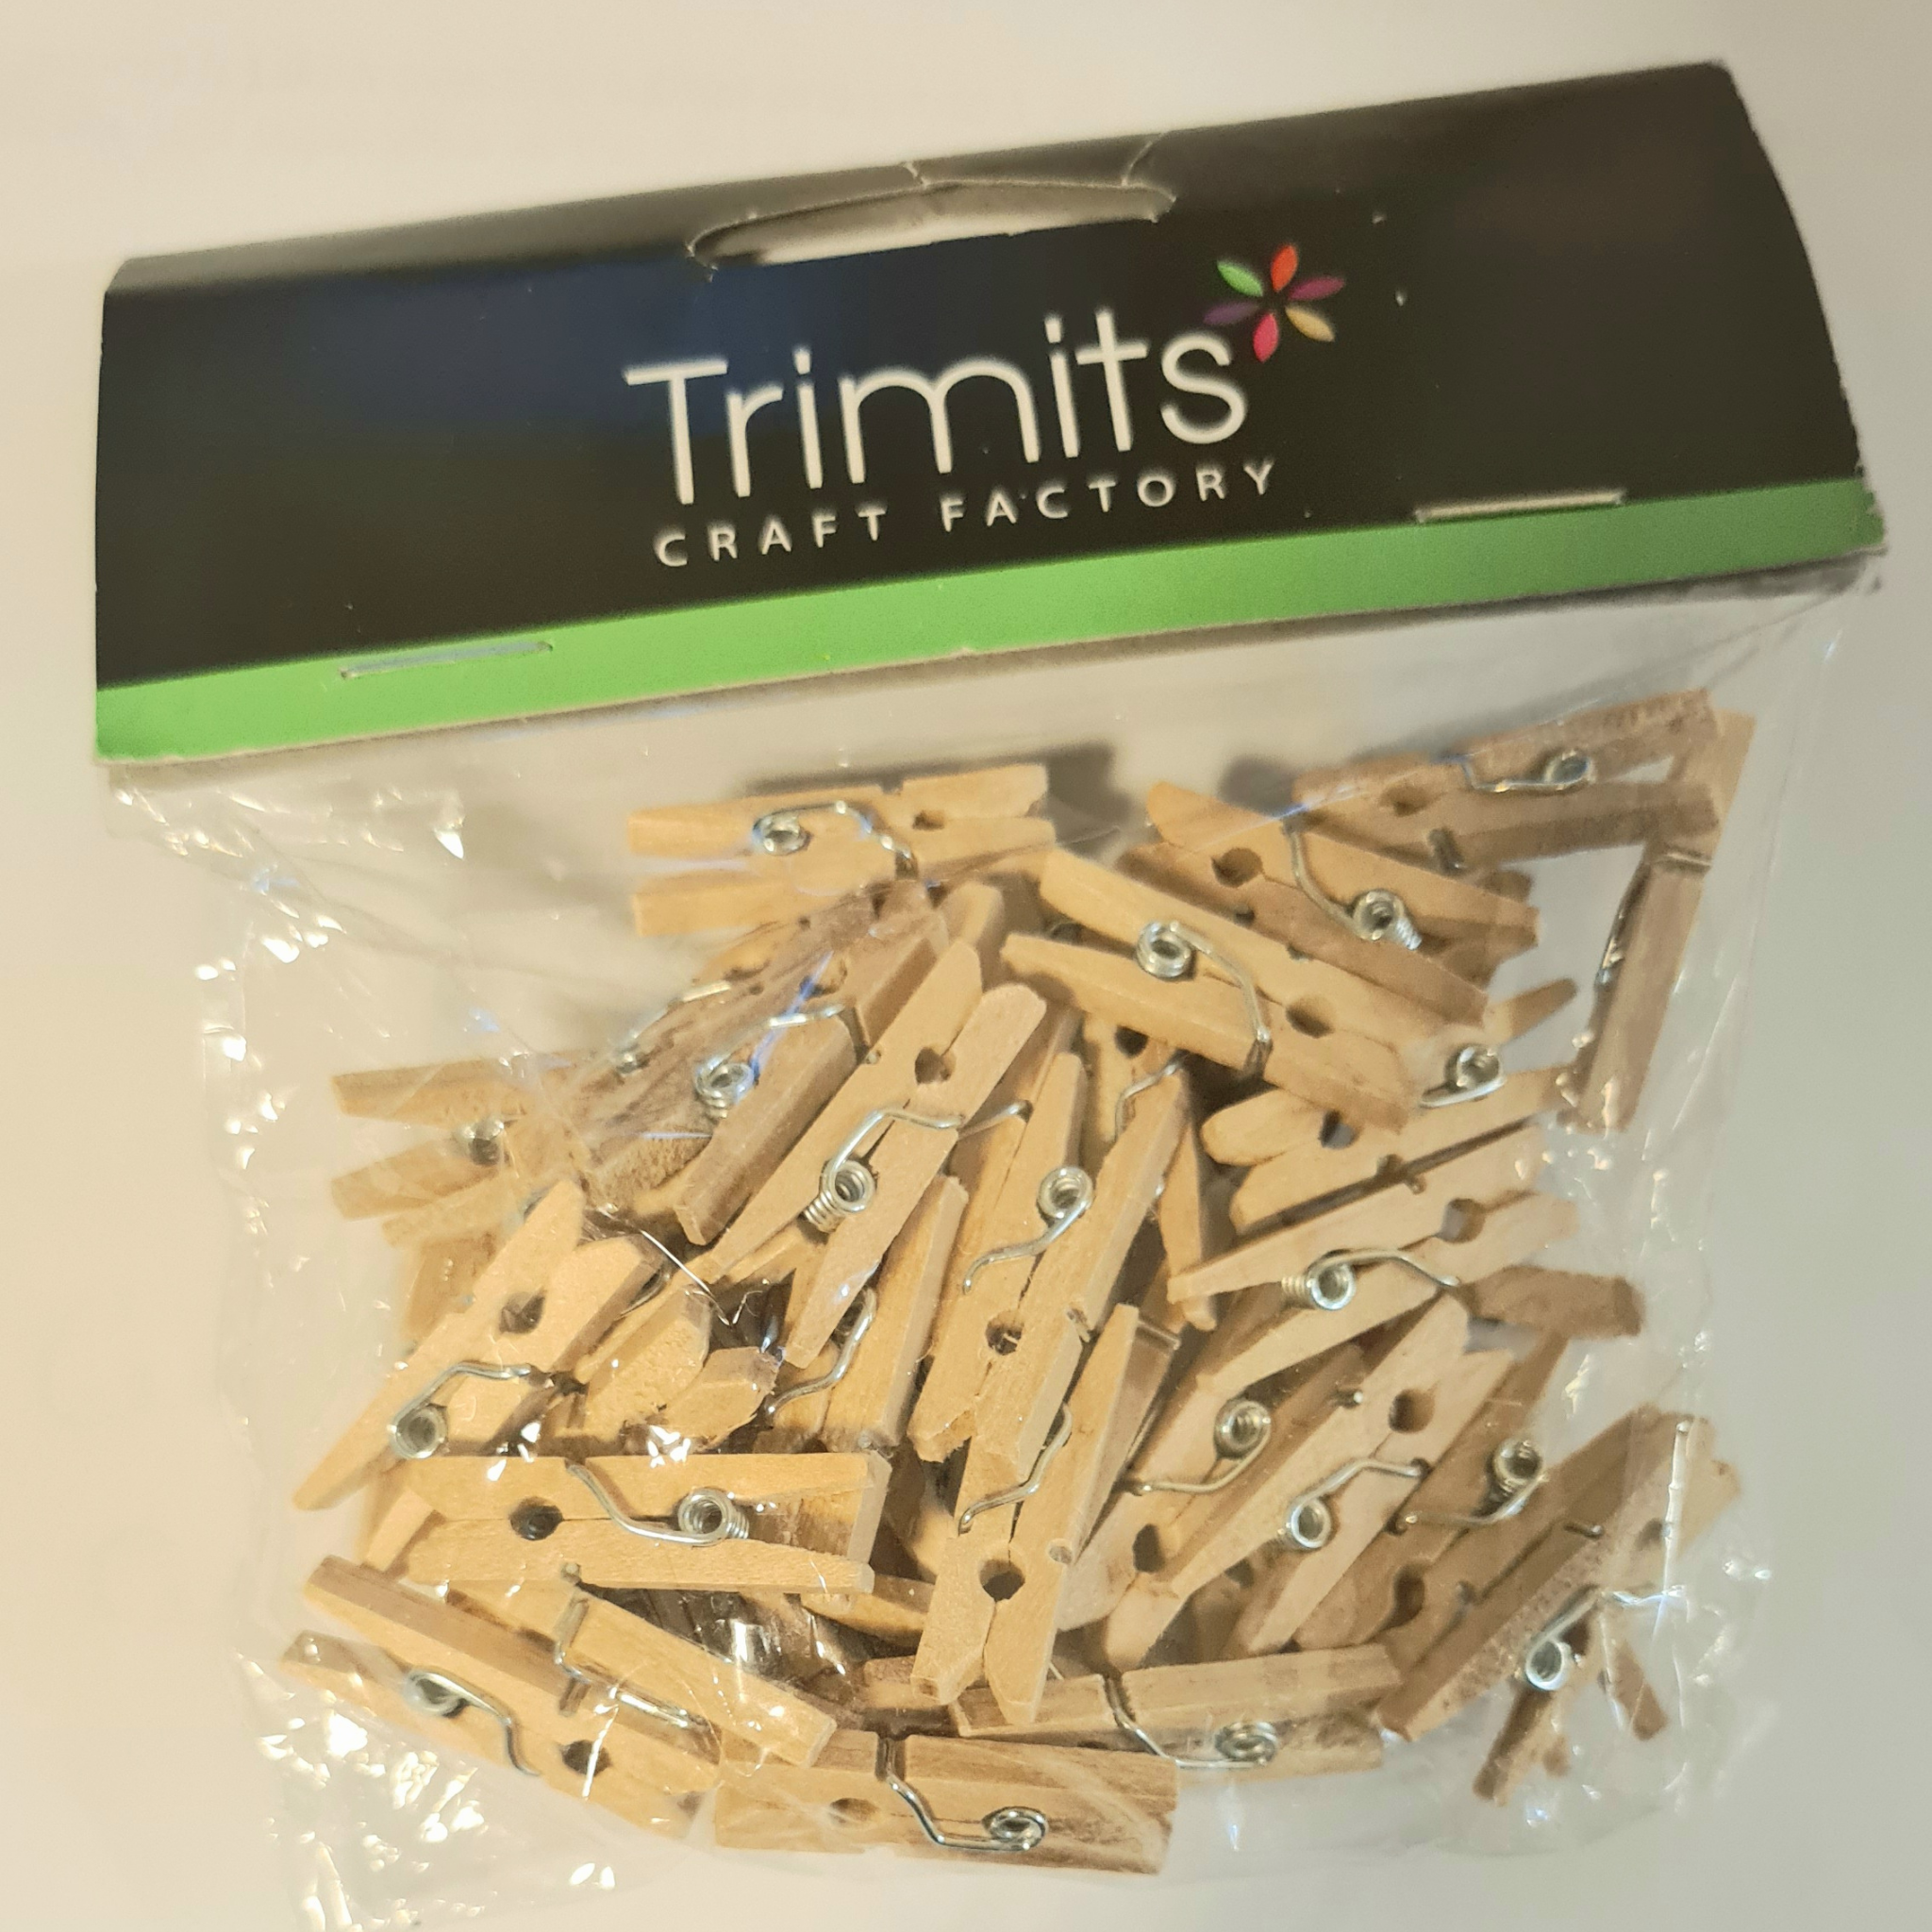 Wooden craft mini clothes pegs, 45 per pack, 25mm long - ideal for making table plans and place settings and decorating gifts